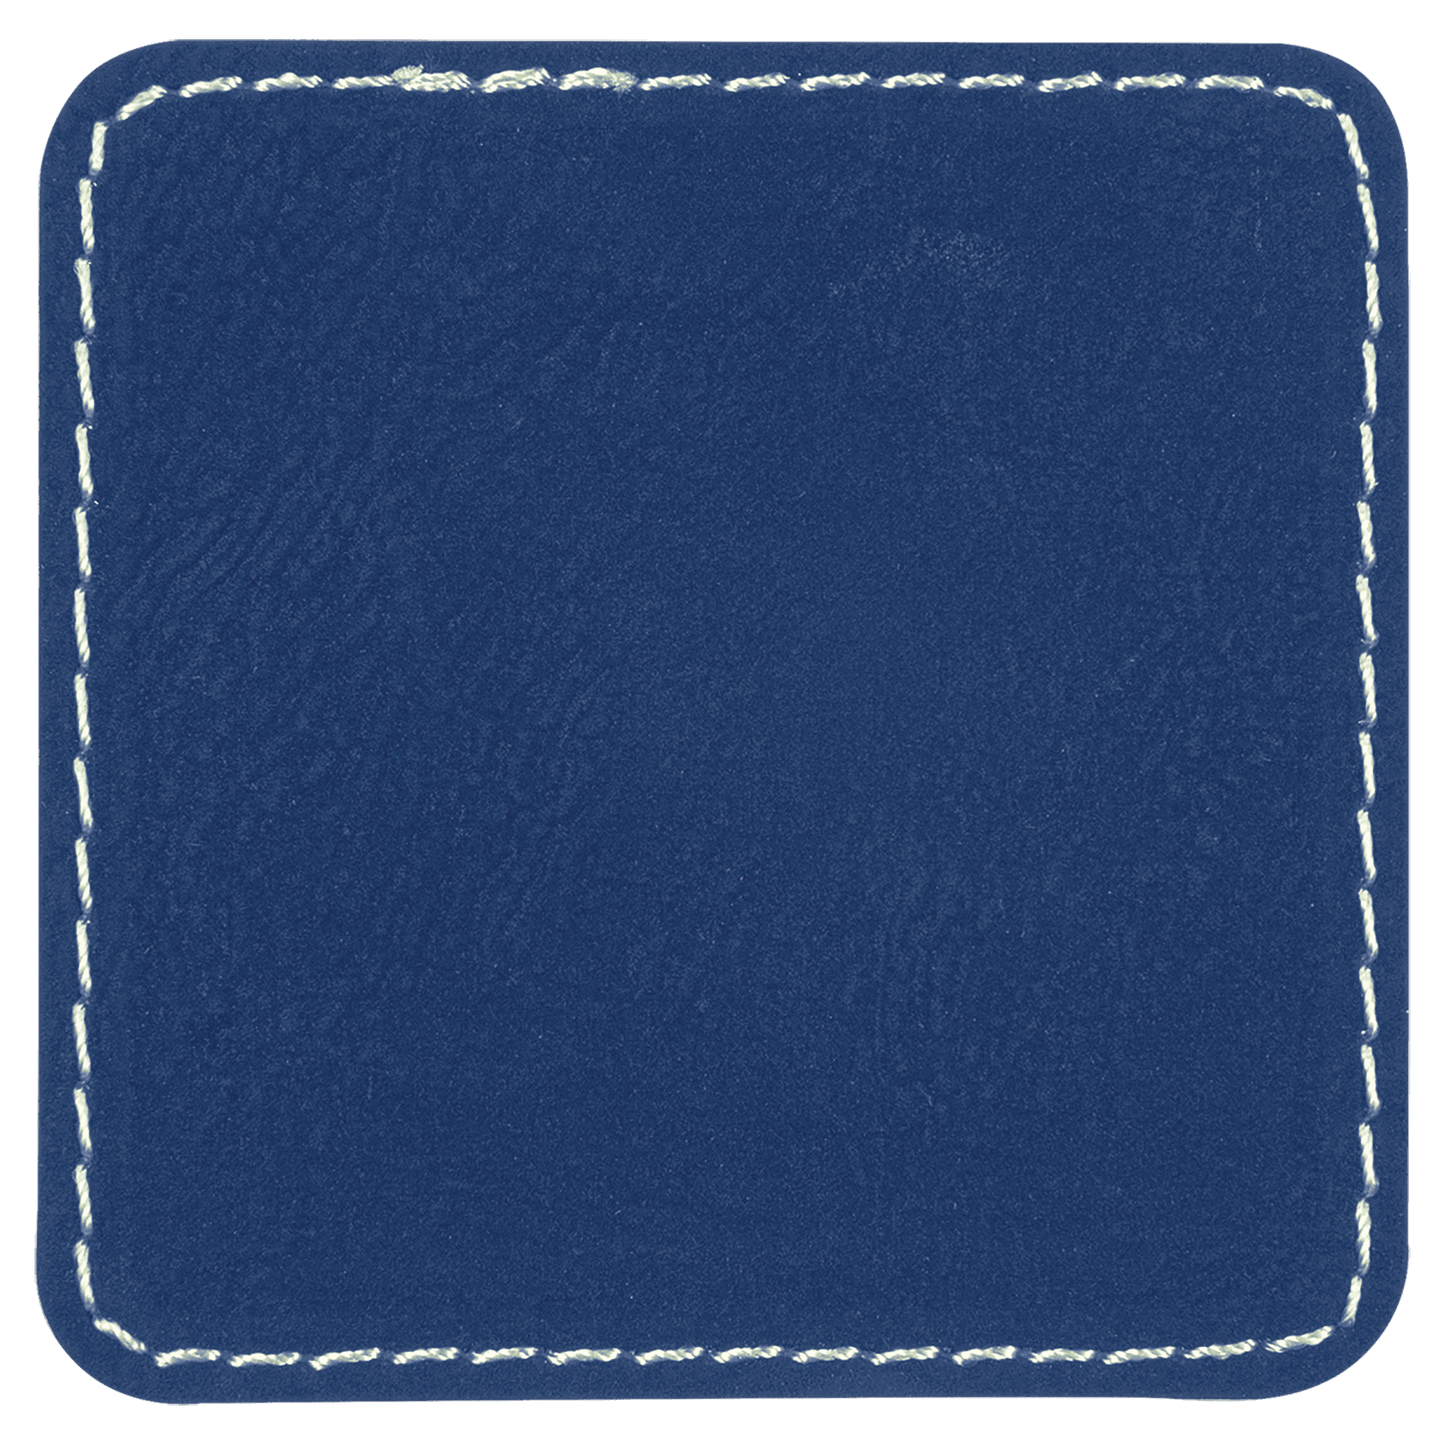 2 1/2" x 2 1/2" Square Blue/Silver Laserable/DTF/UV DTF Leatherette Patch with Heat Adhesive